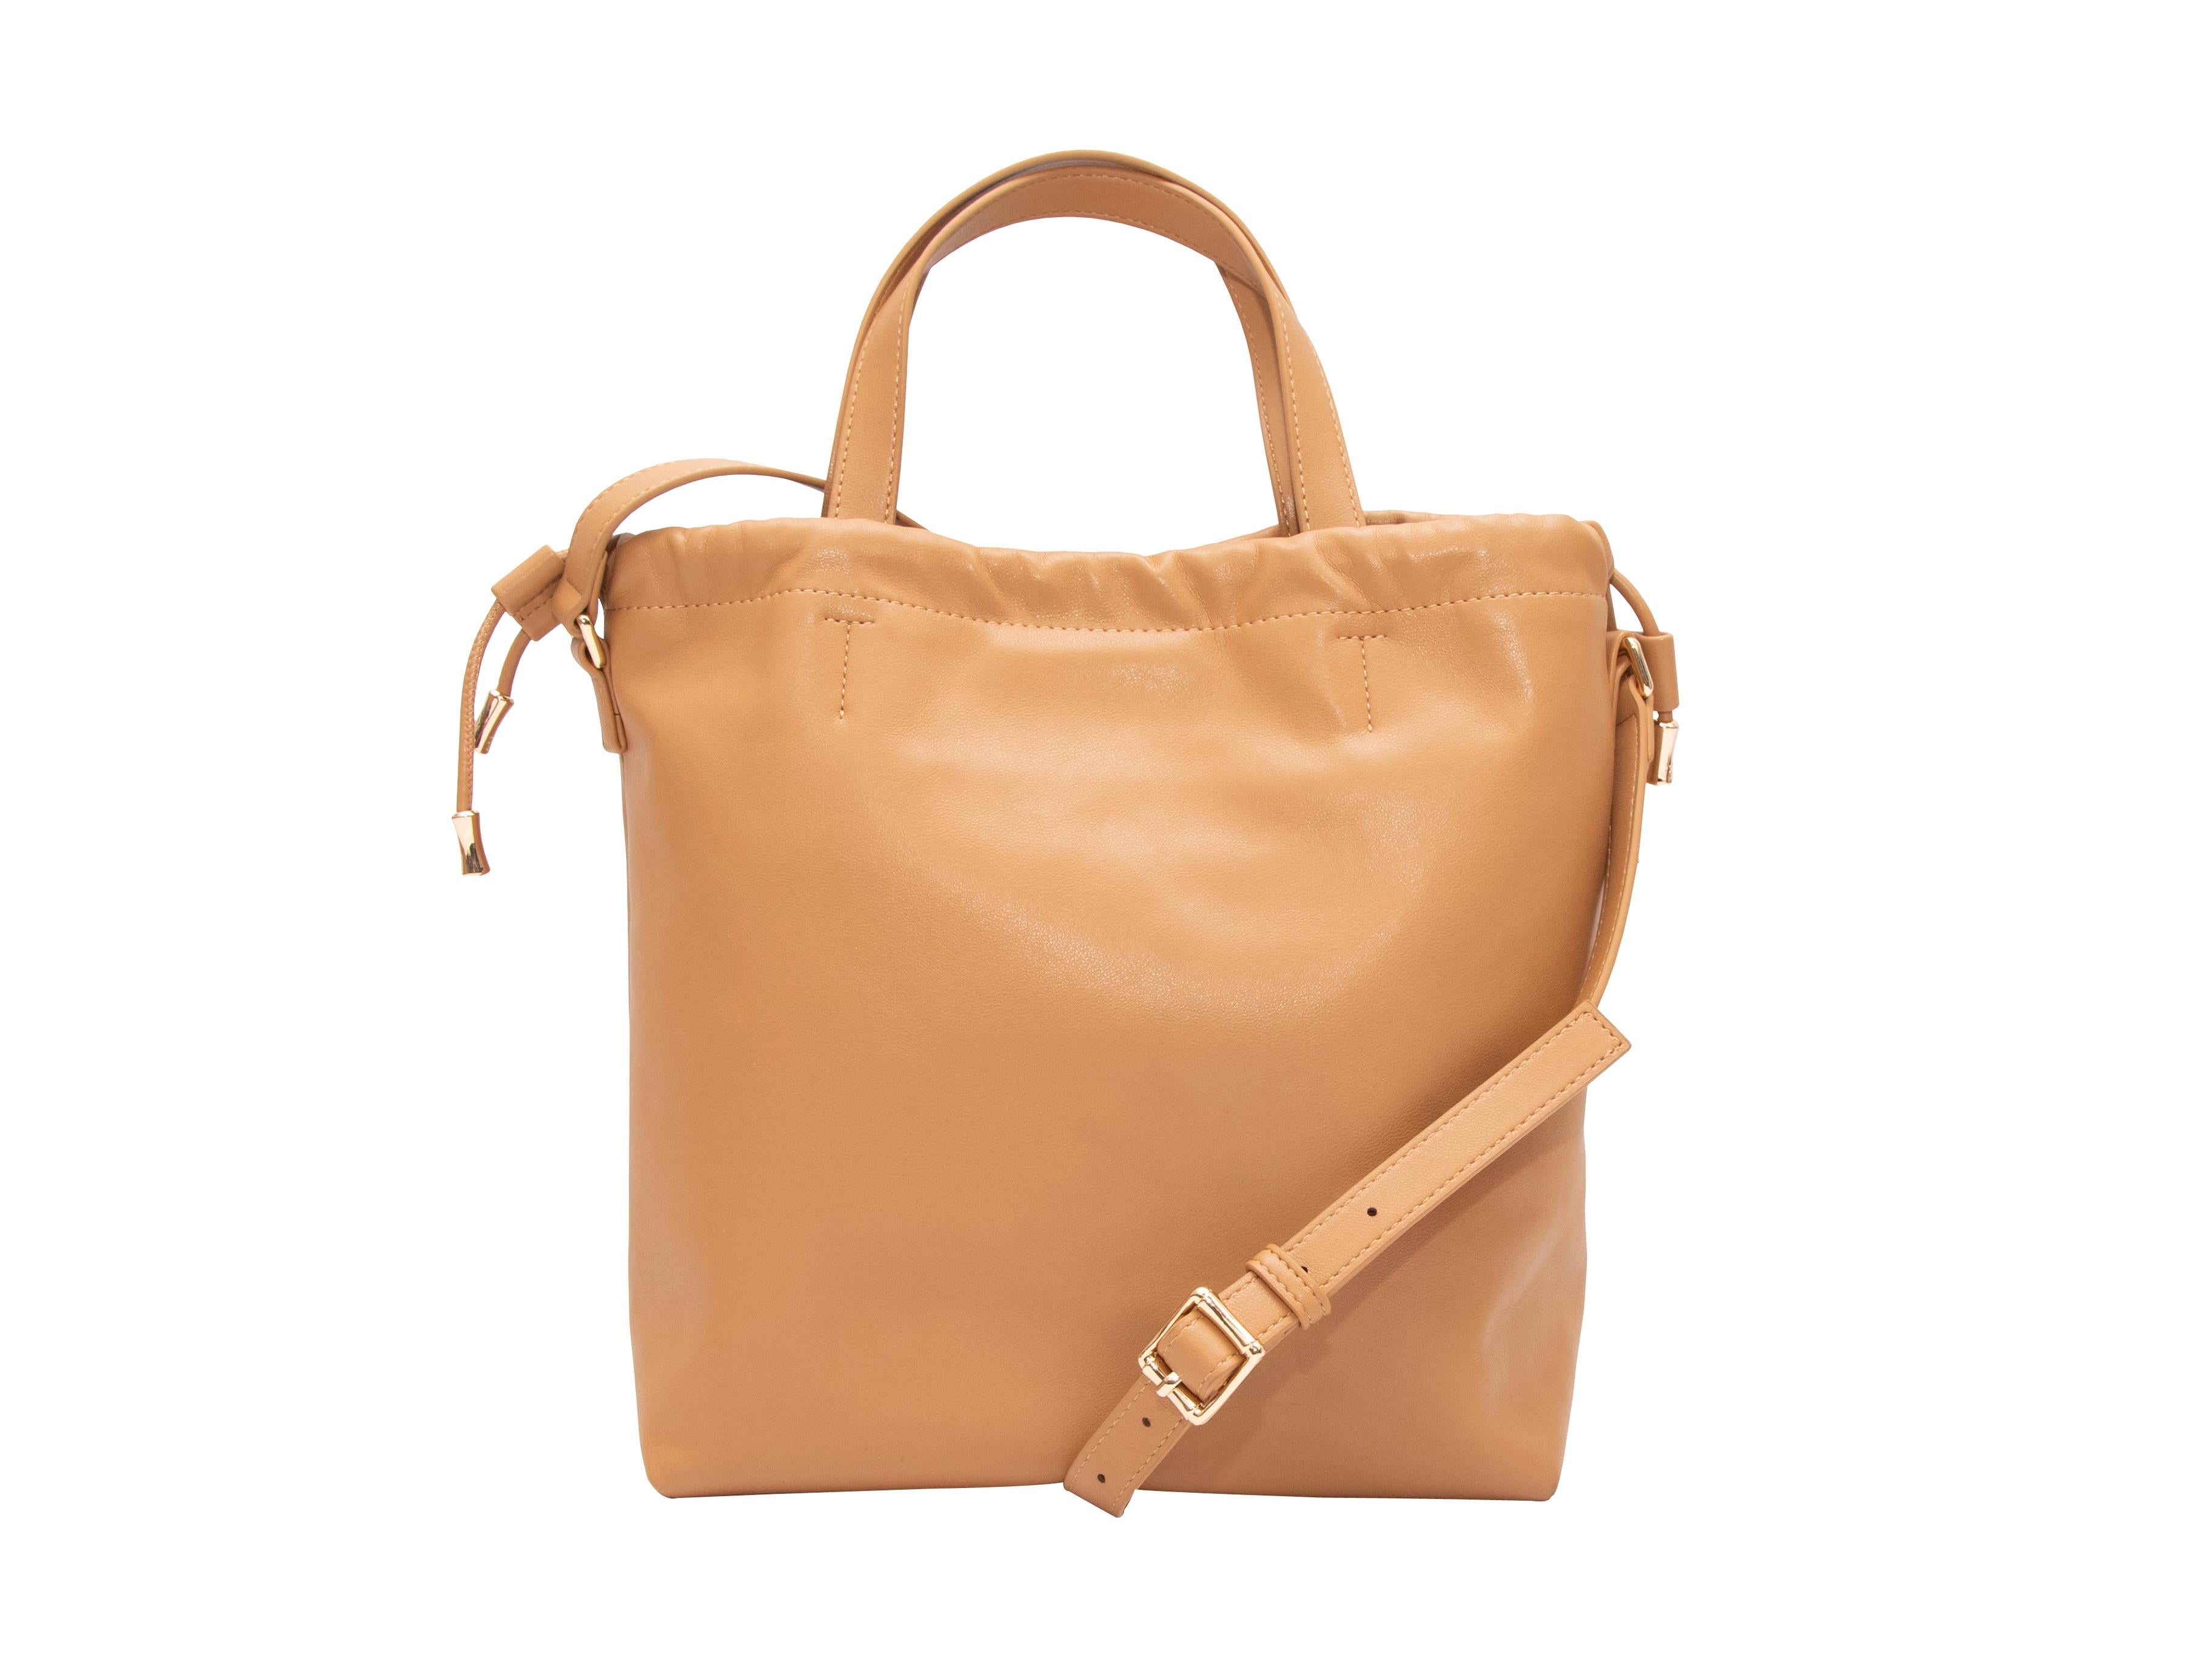 Tan A.P.C. Leather Shoulder Bag. This bag features a leather body, gold-tone hardware, dual flat top handles, a single flat shoulder strap, and a top drawstring closure. 12